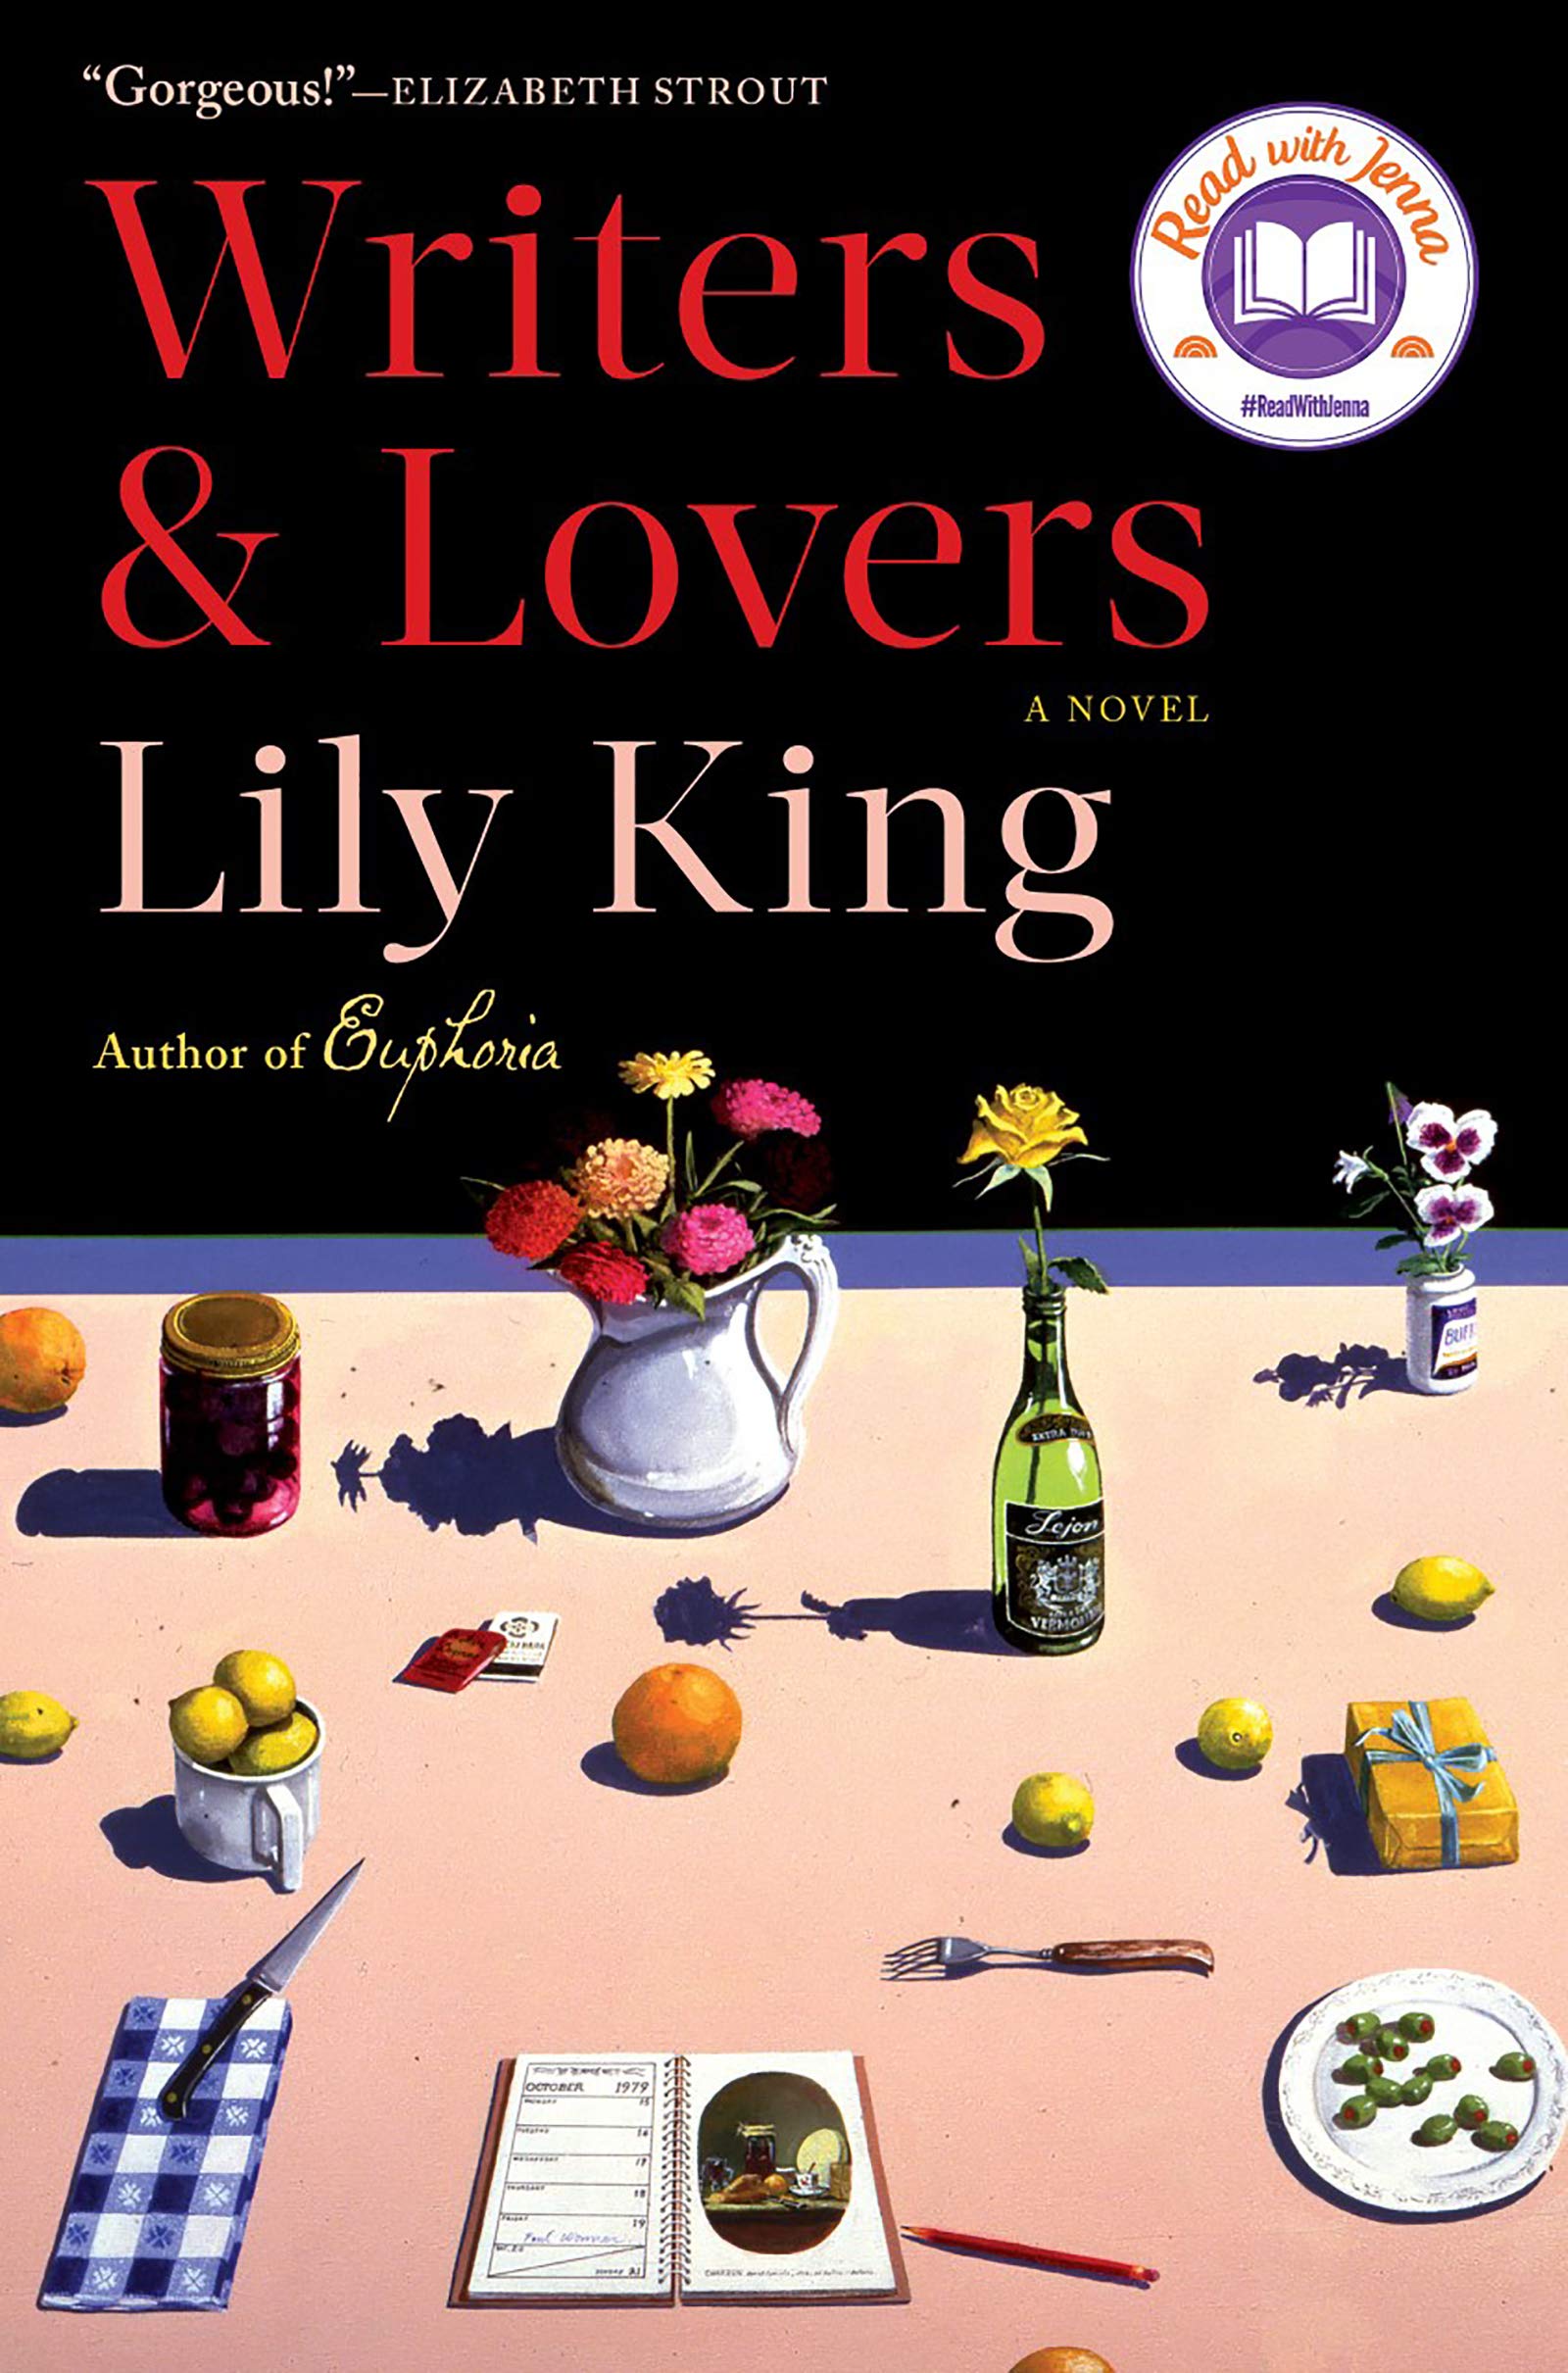 Image for "Writers & Lovers"